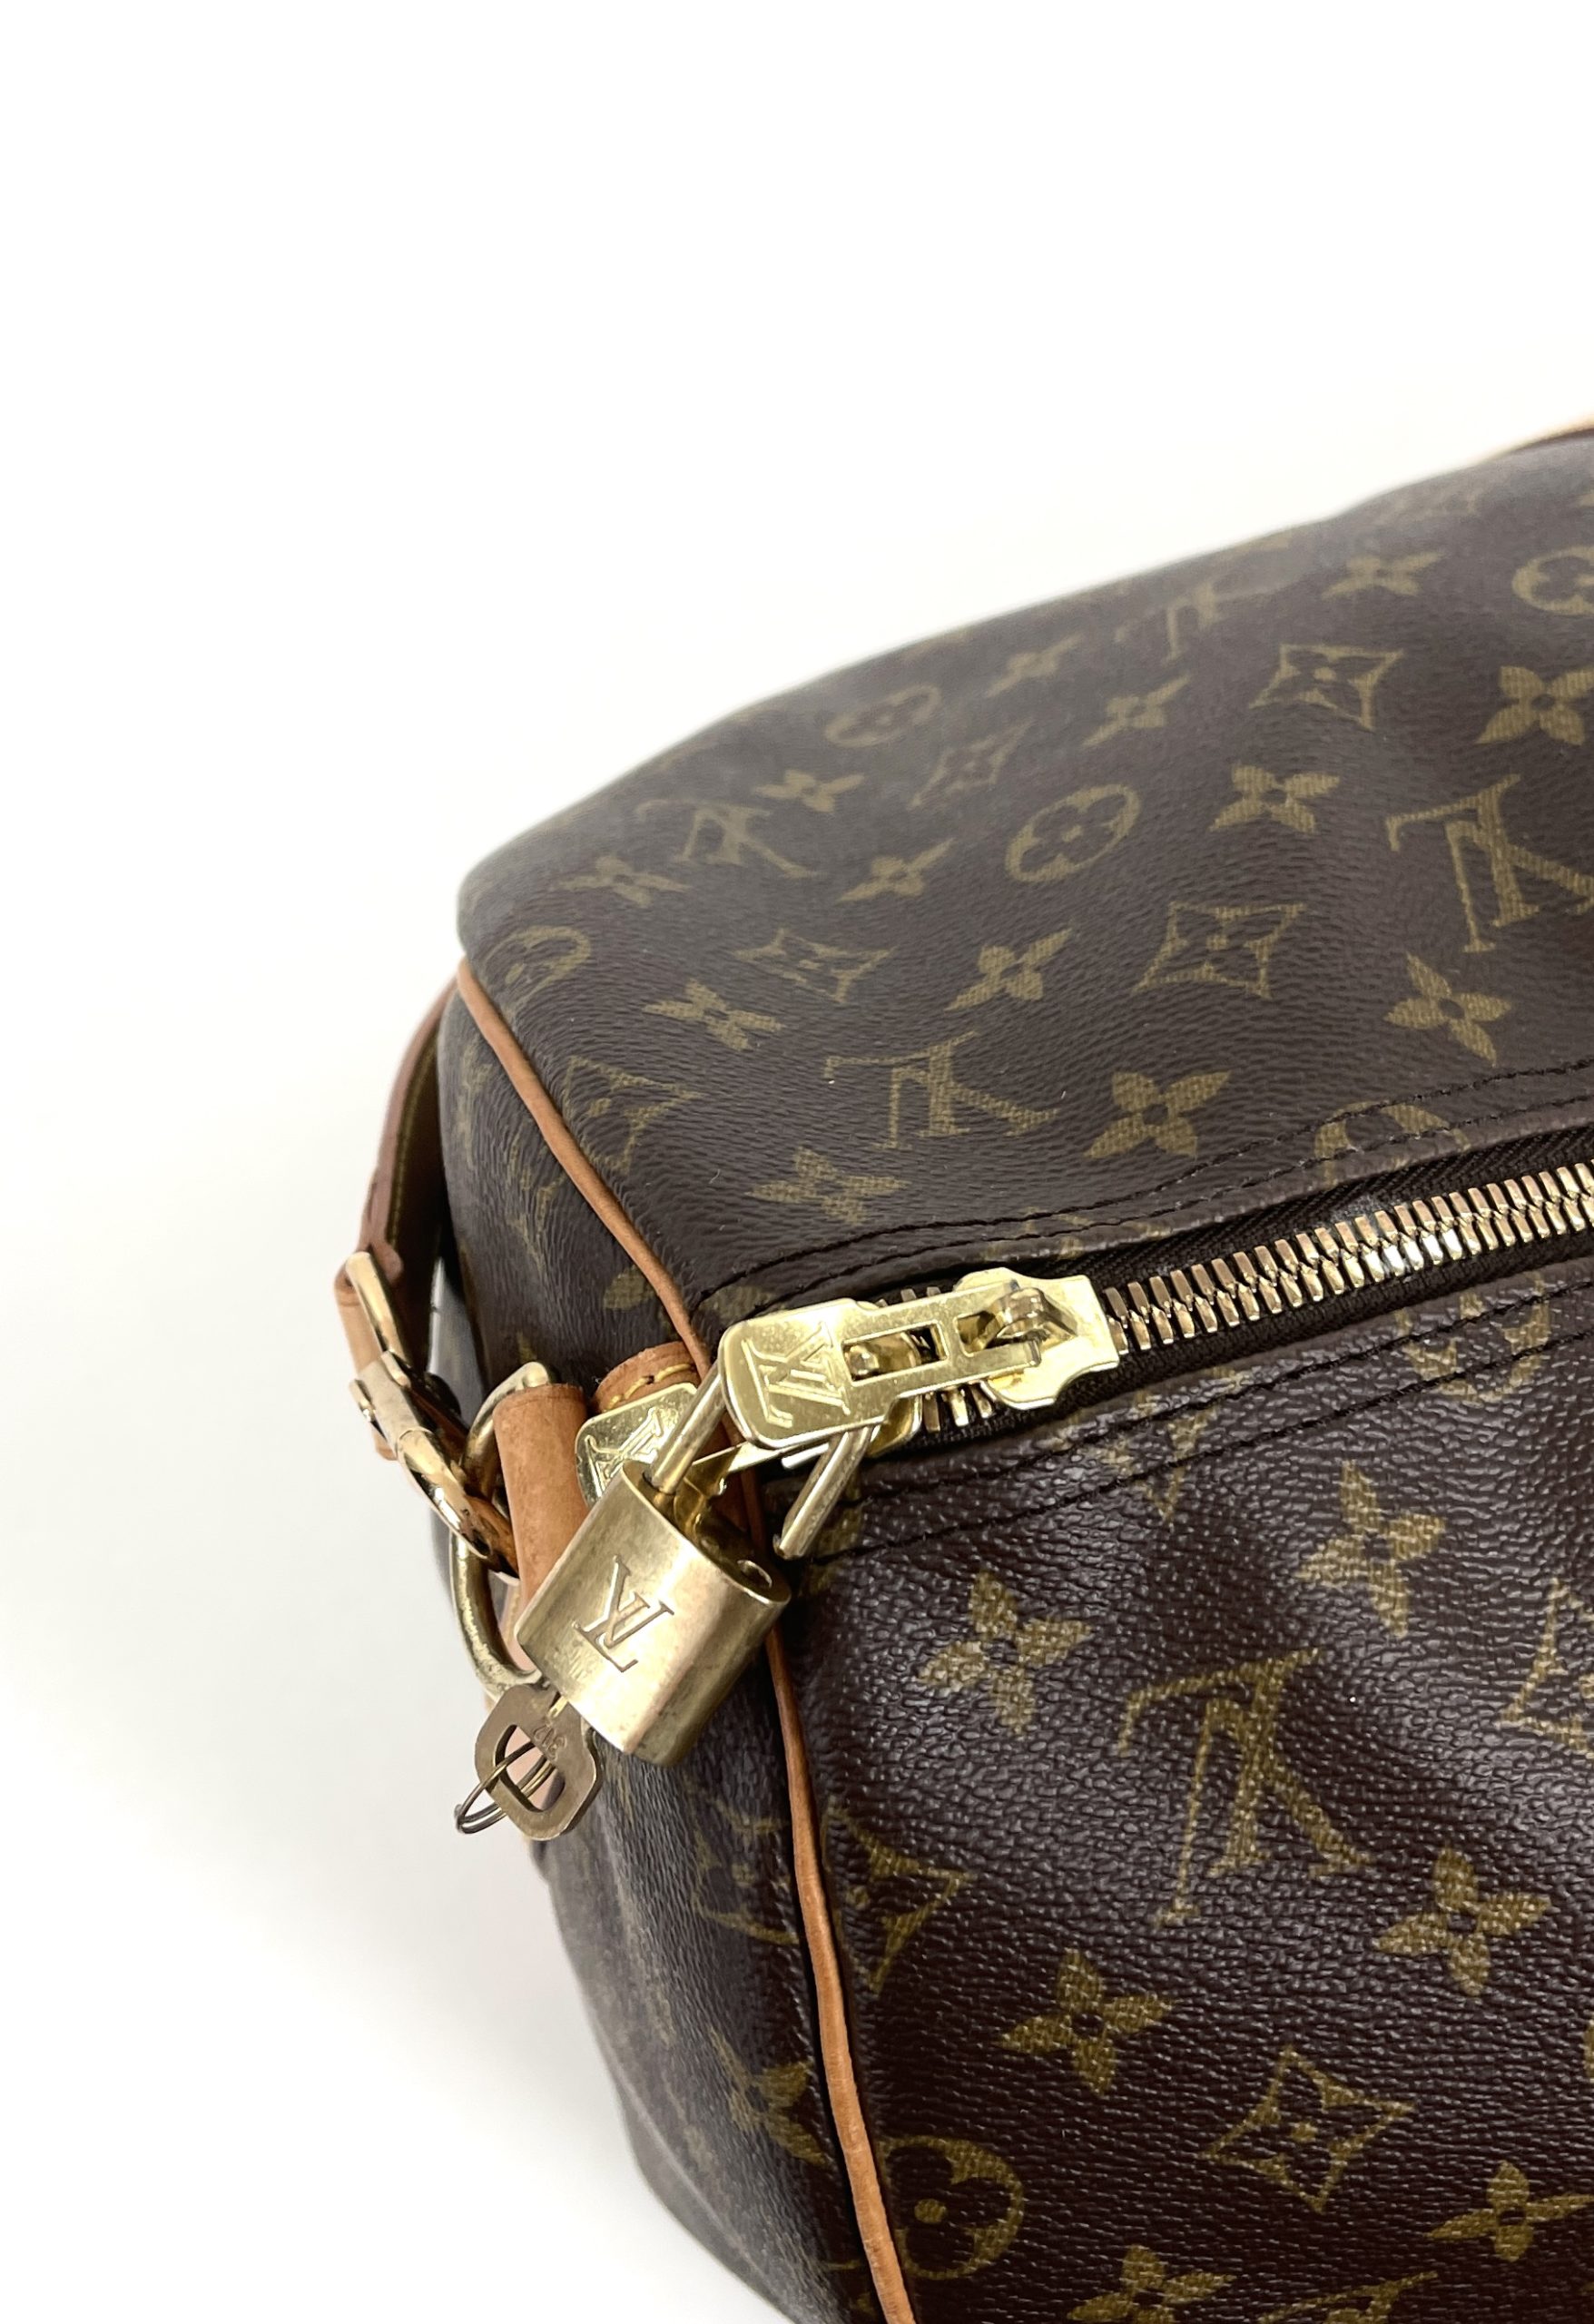 Louis Vuitton Duffle Bag Size 55 With lock & Key for Sale in